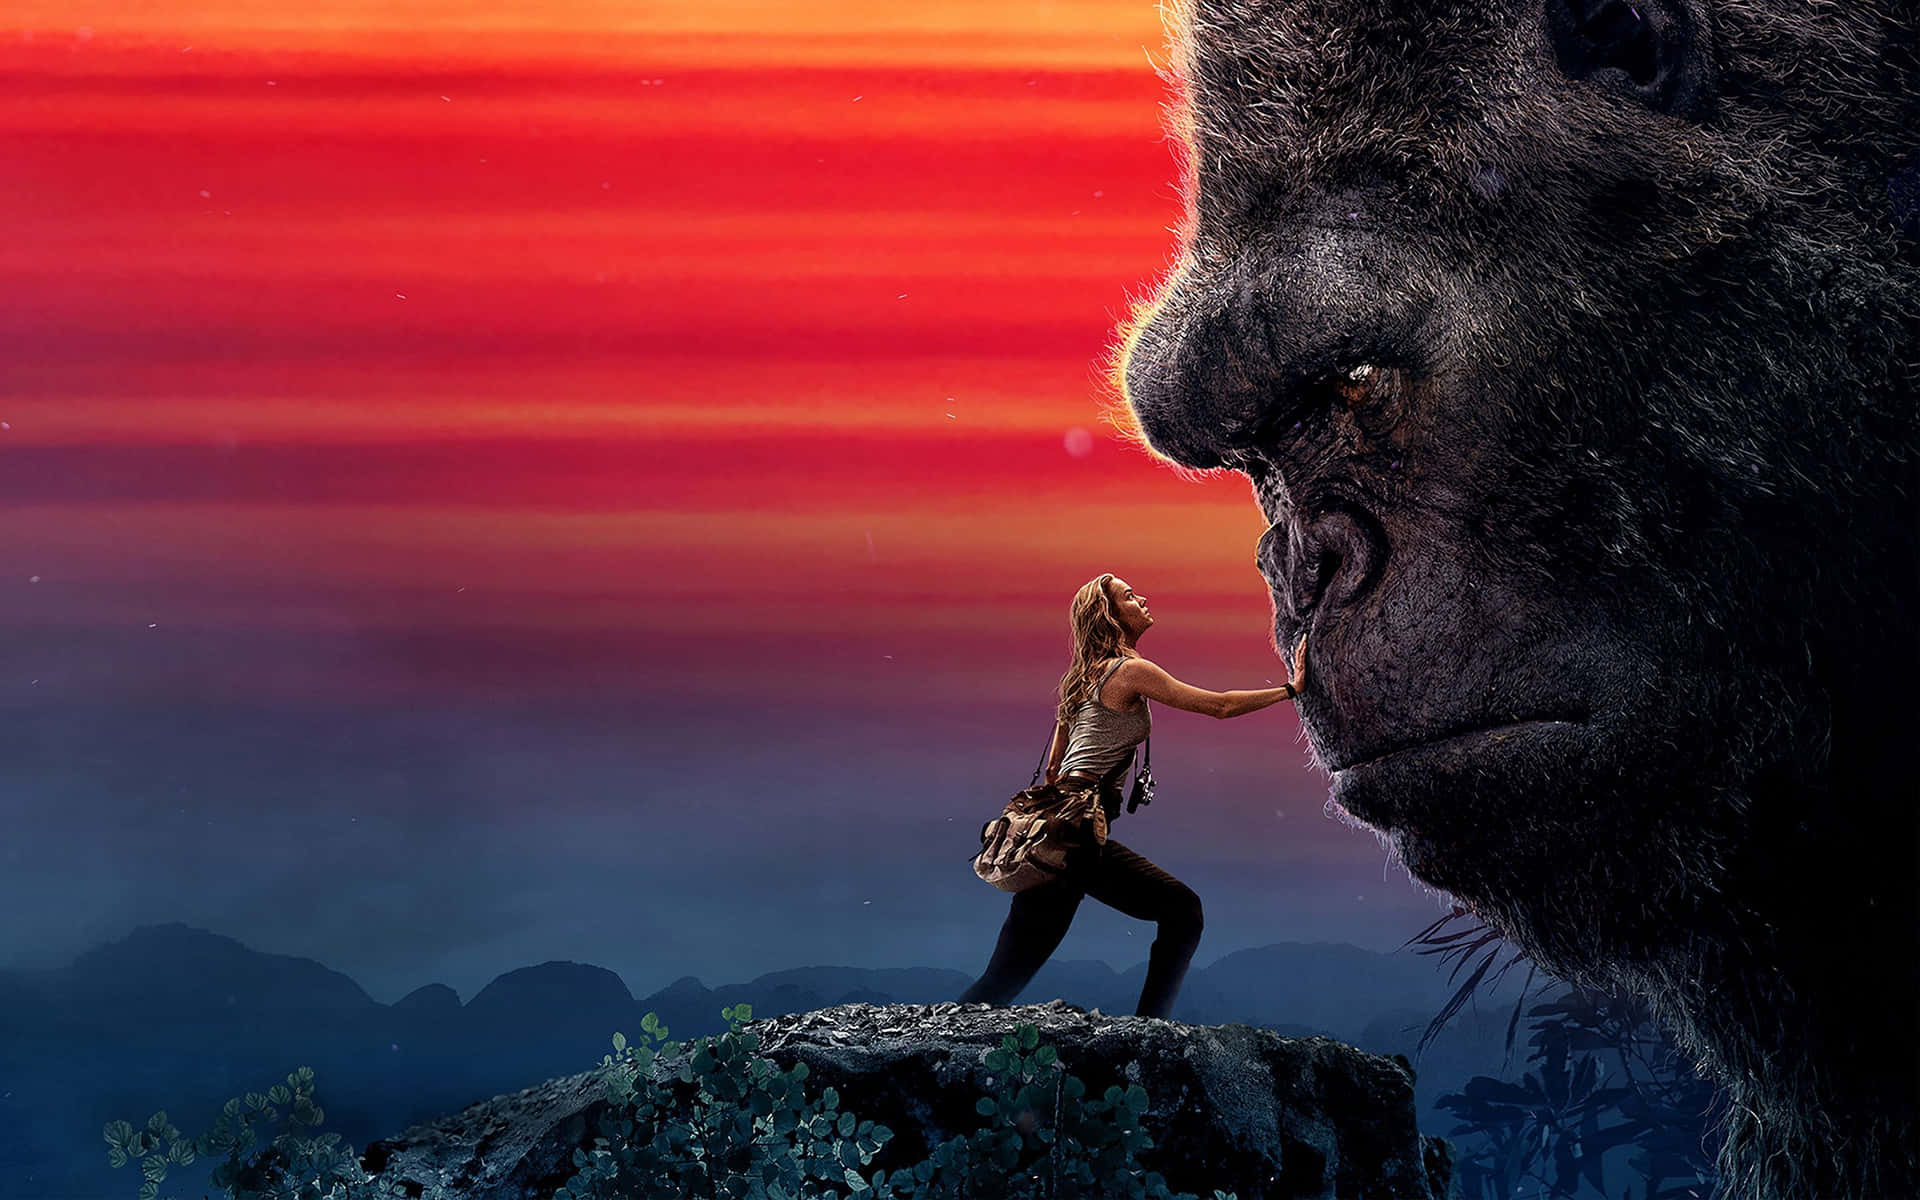 King Kong Movie Poster With A Woman Standing Next To A Gorilla Wallpaper